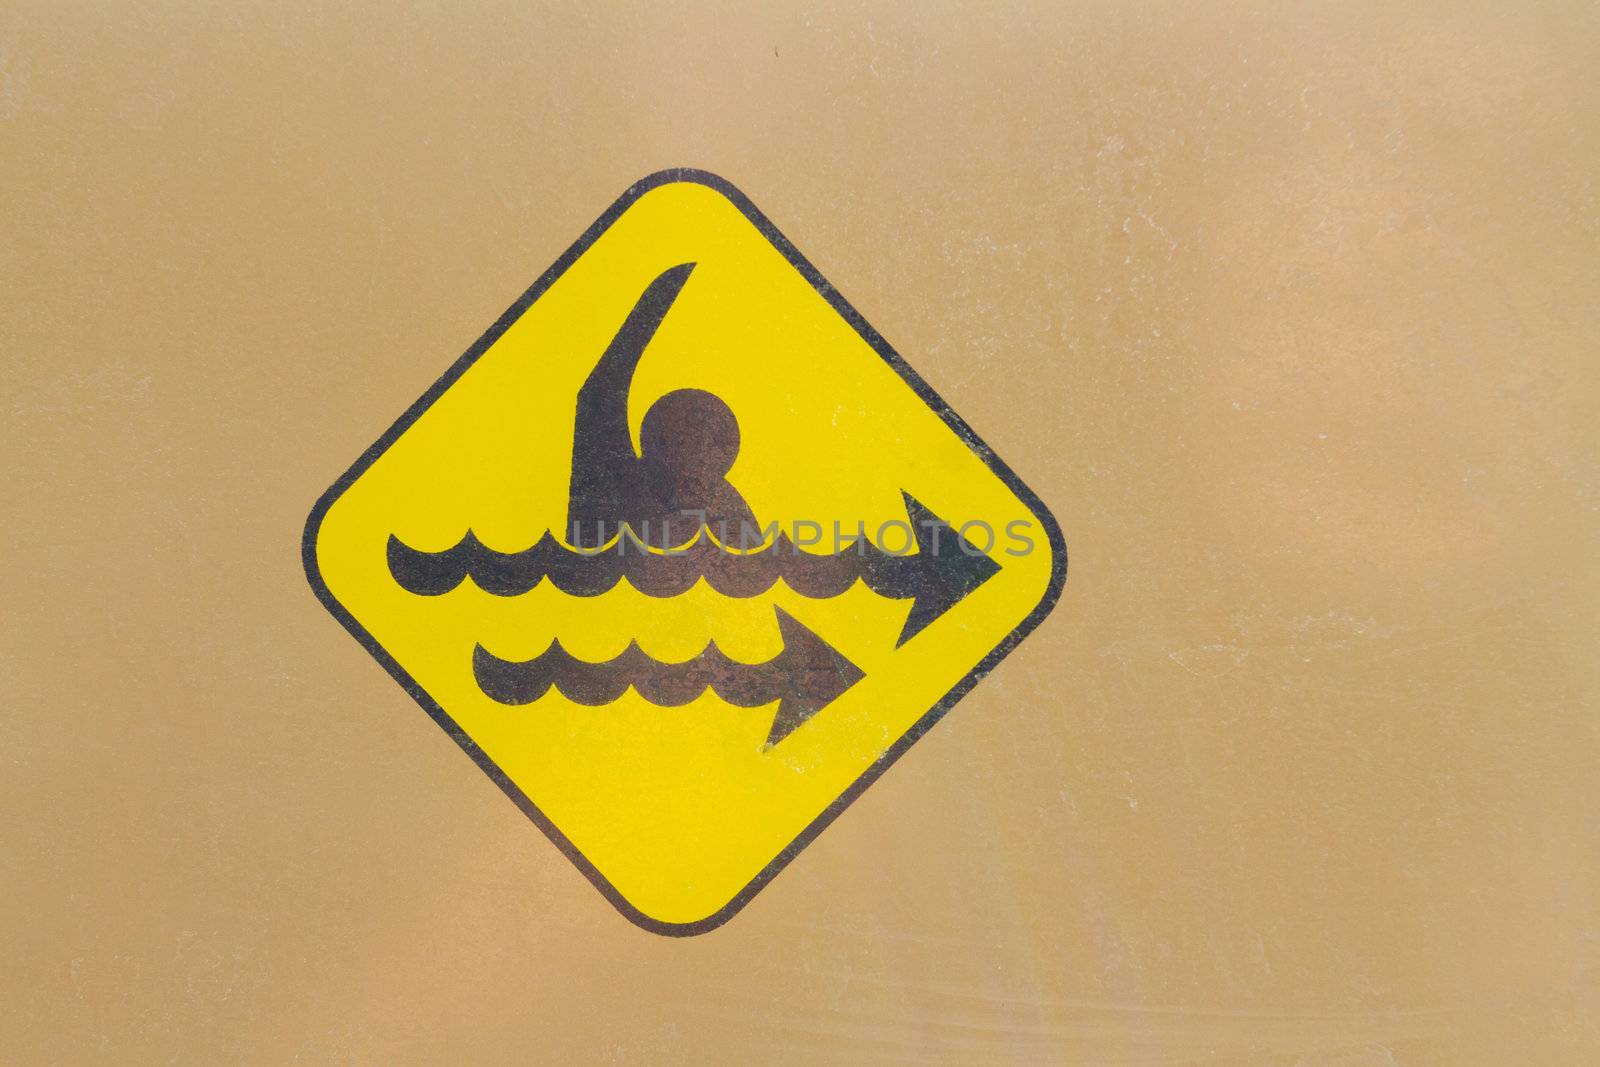 A warning sign icon shows the danger of a strong rip current. This yellow hazard sign is universal.